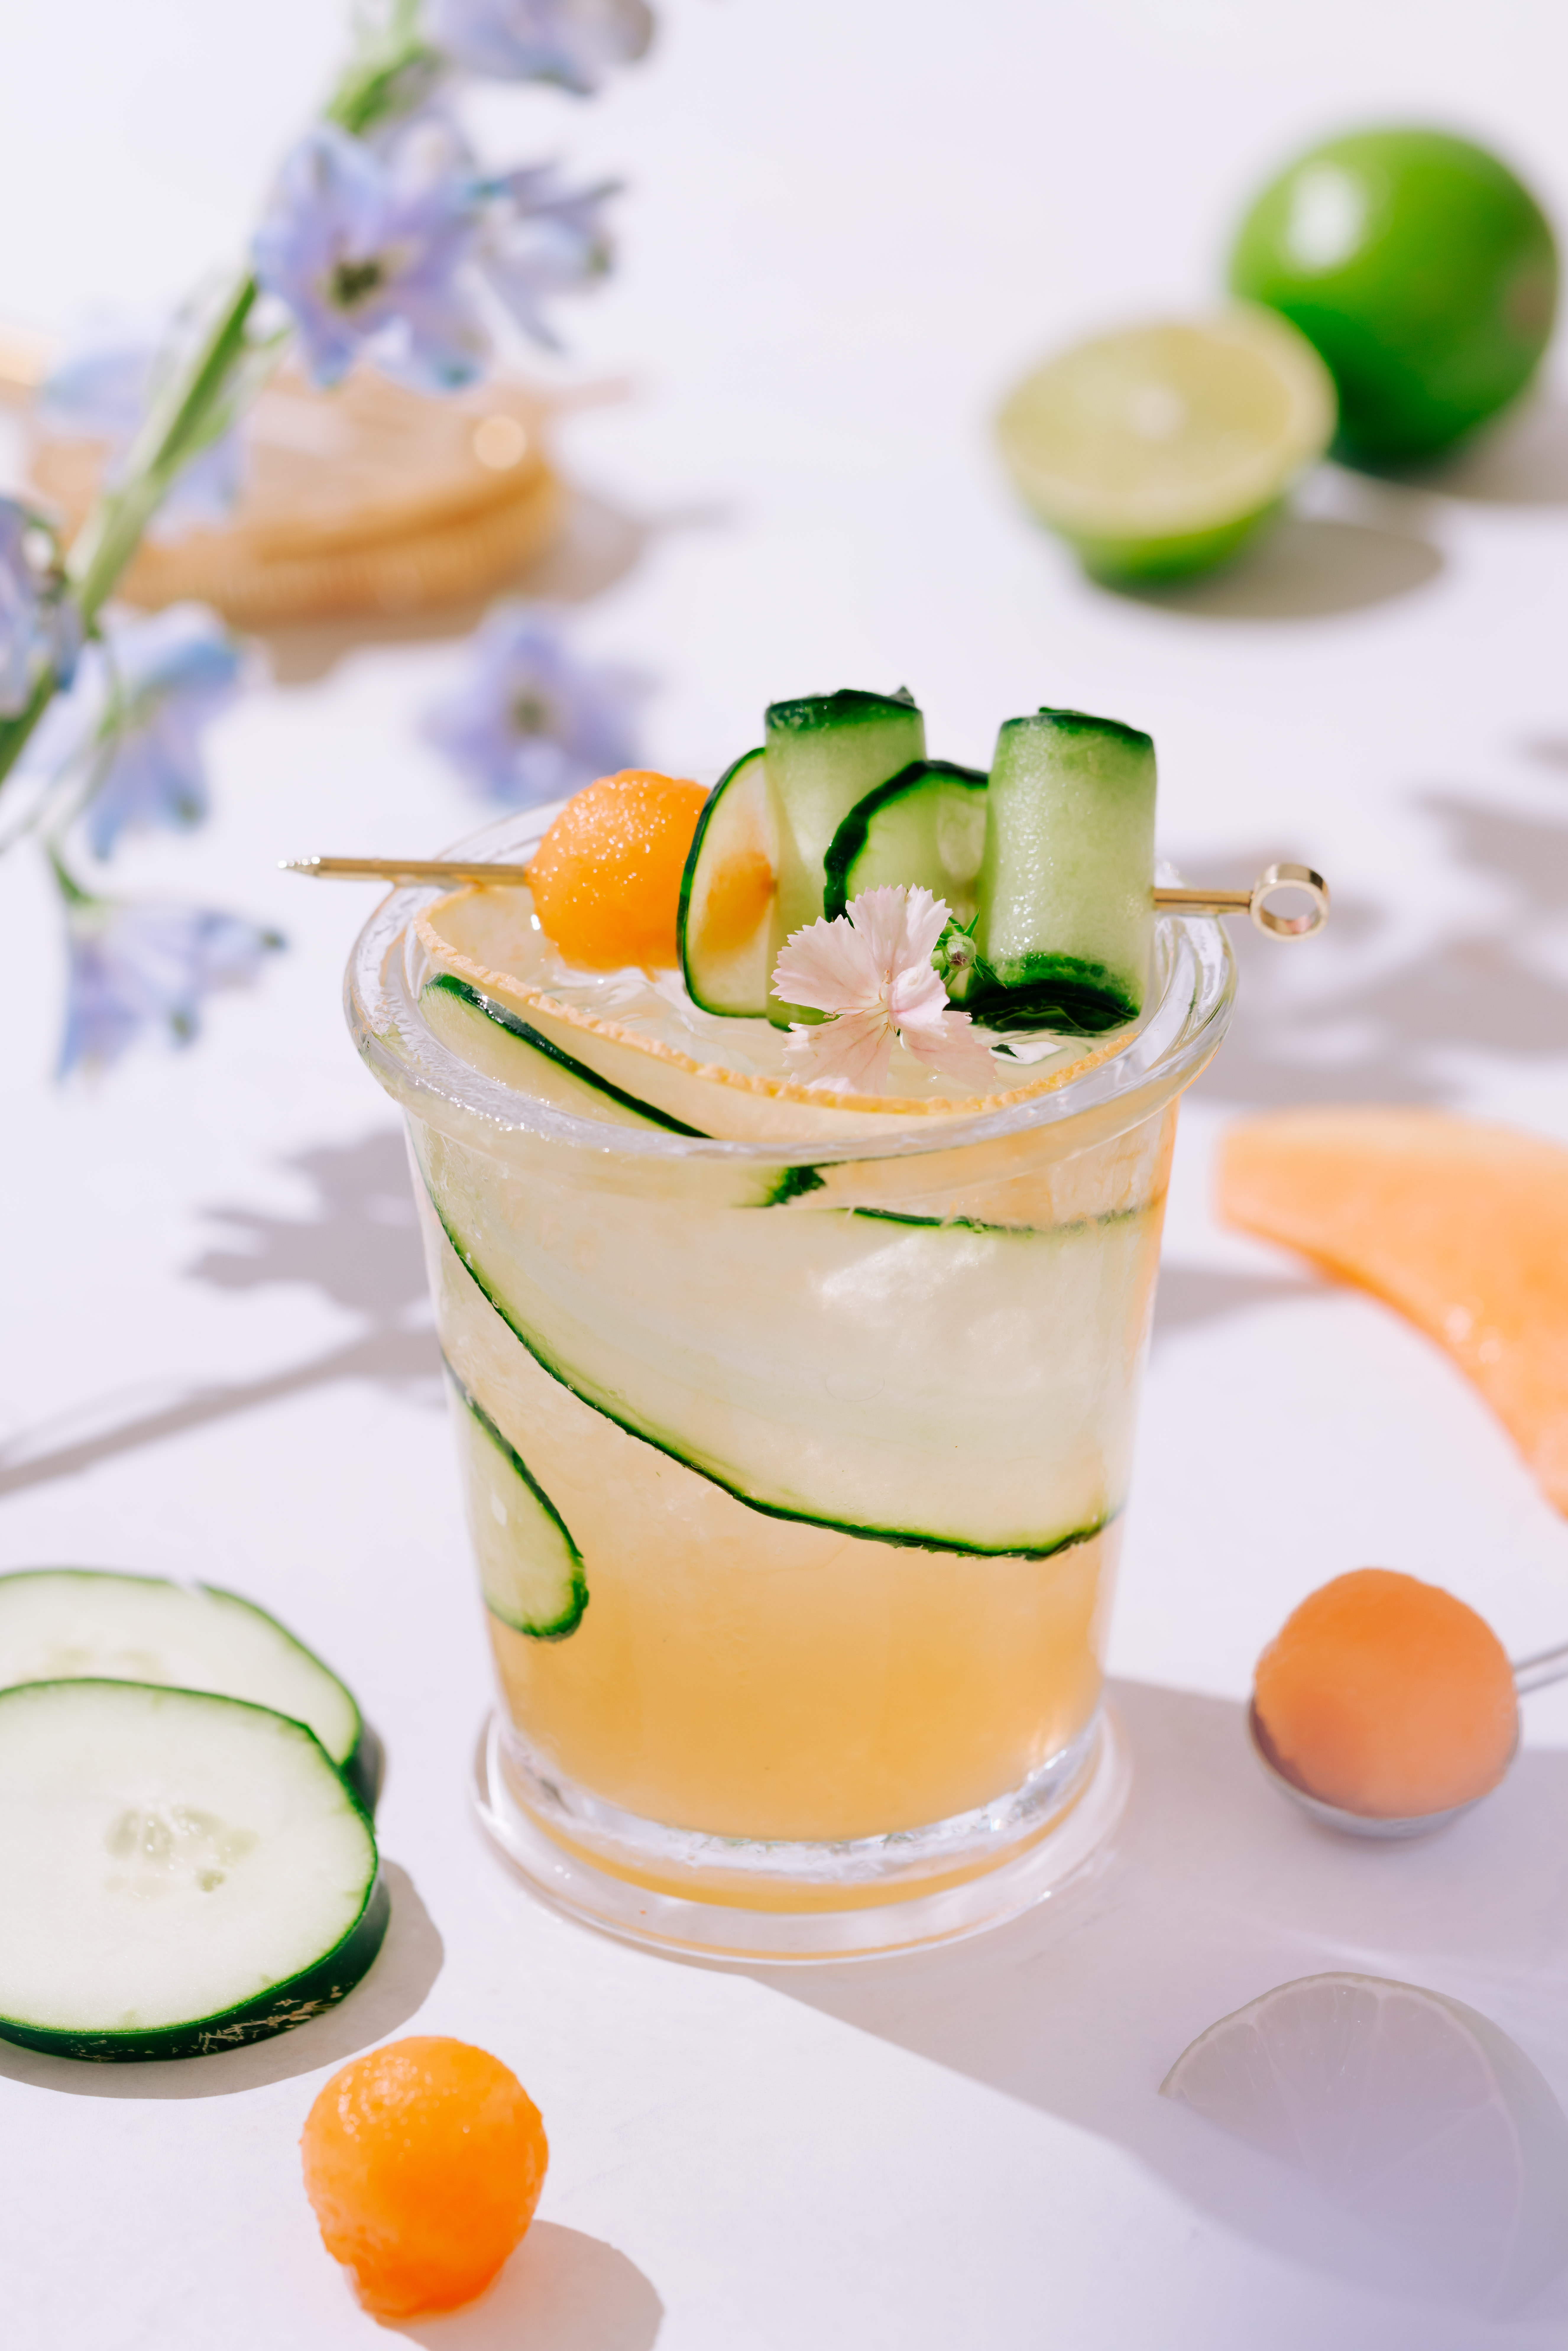 Cucumber Melon Spritzer - Eating by Elaine